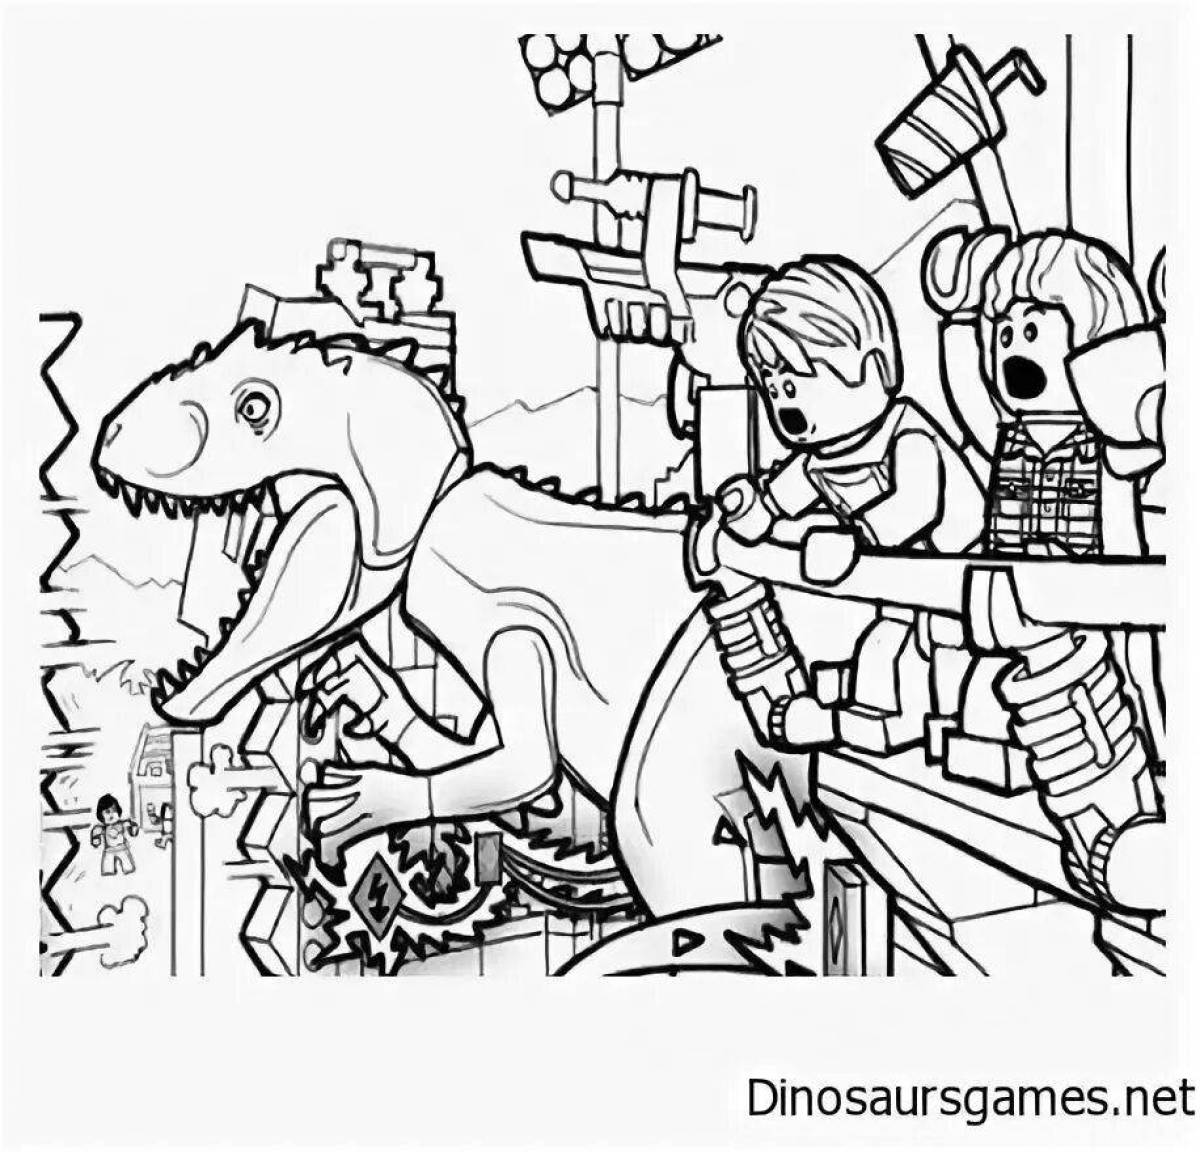 Exciting lego jurassic park coloring book